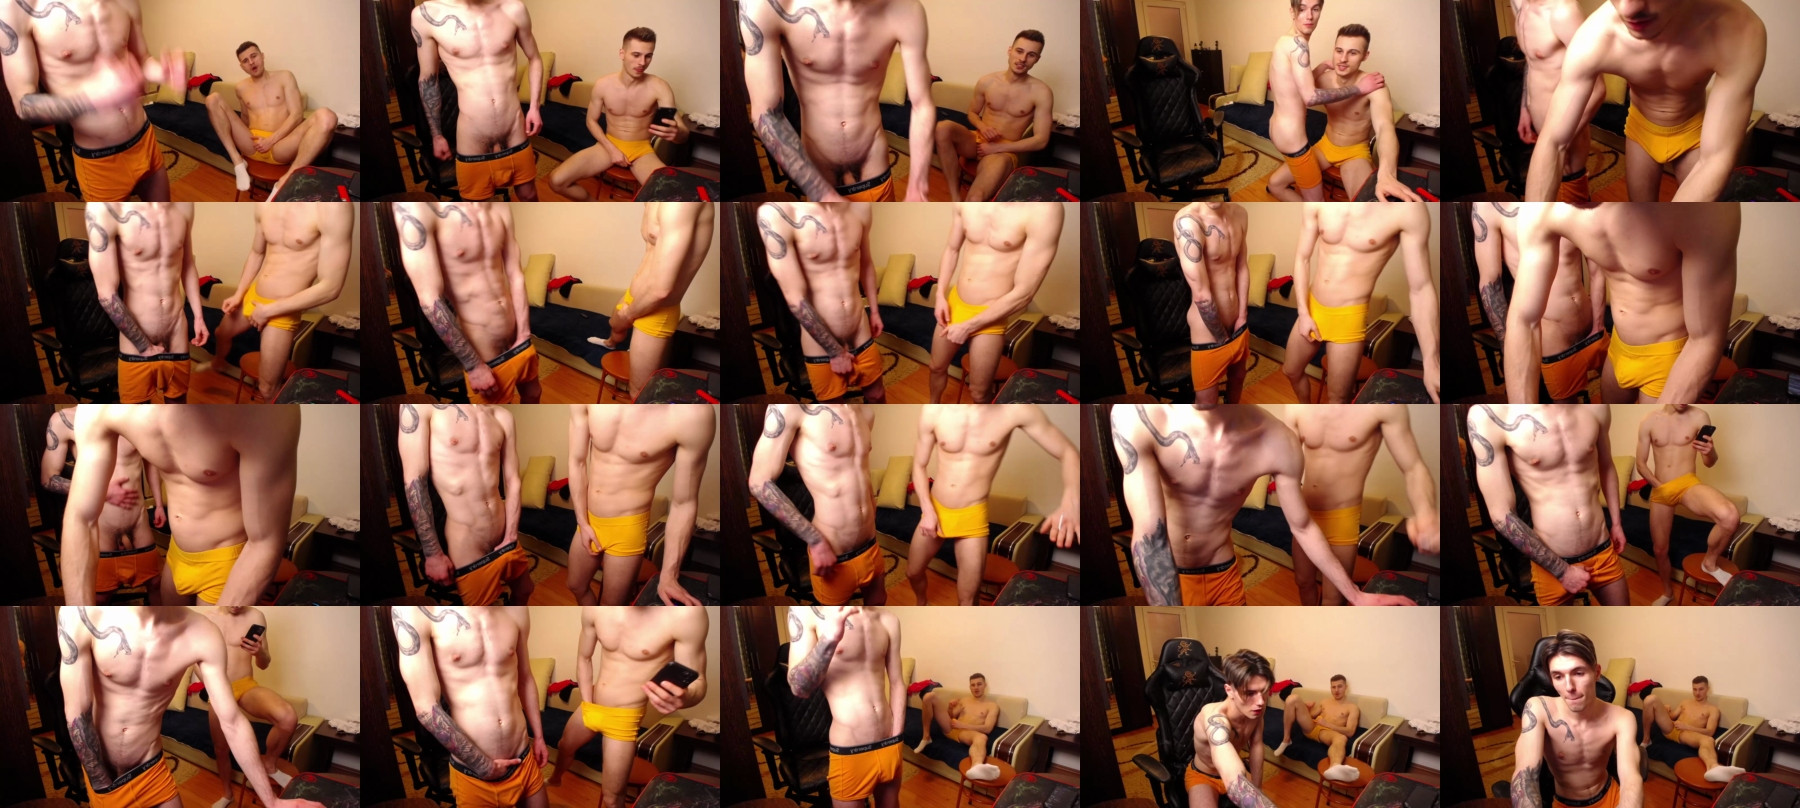 Awesome_Justin  31-03-2021 Male Topless